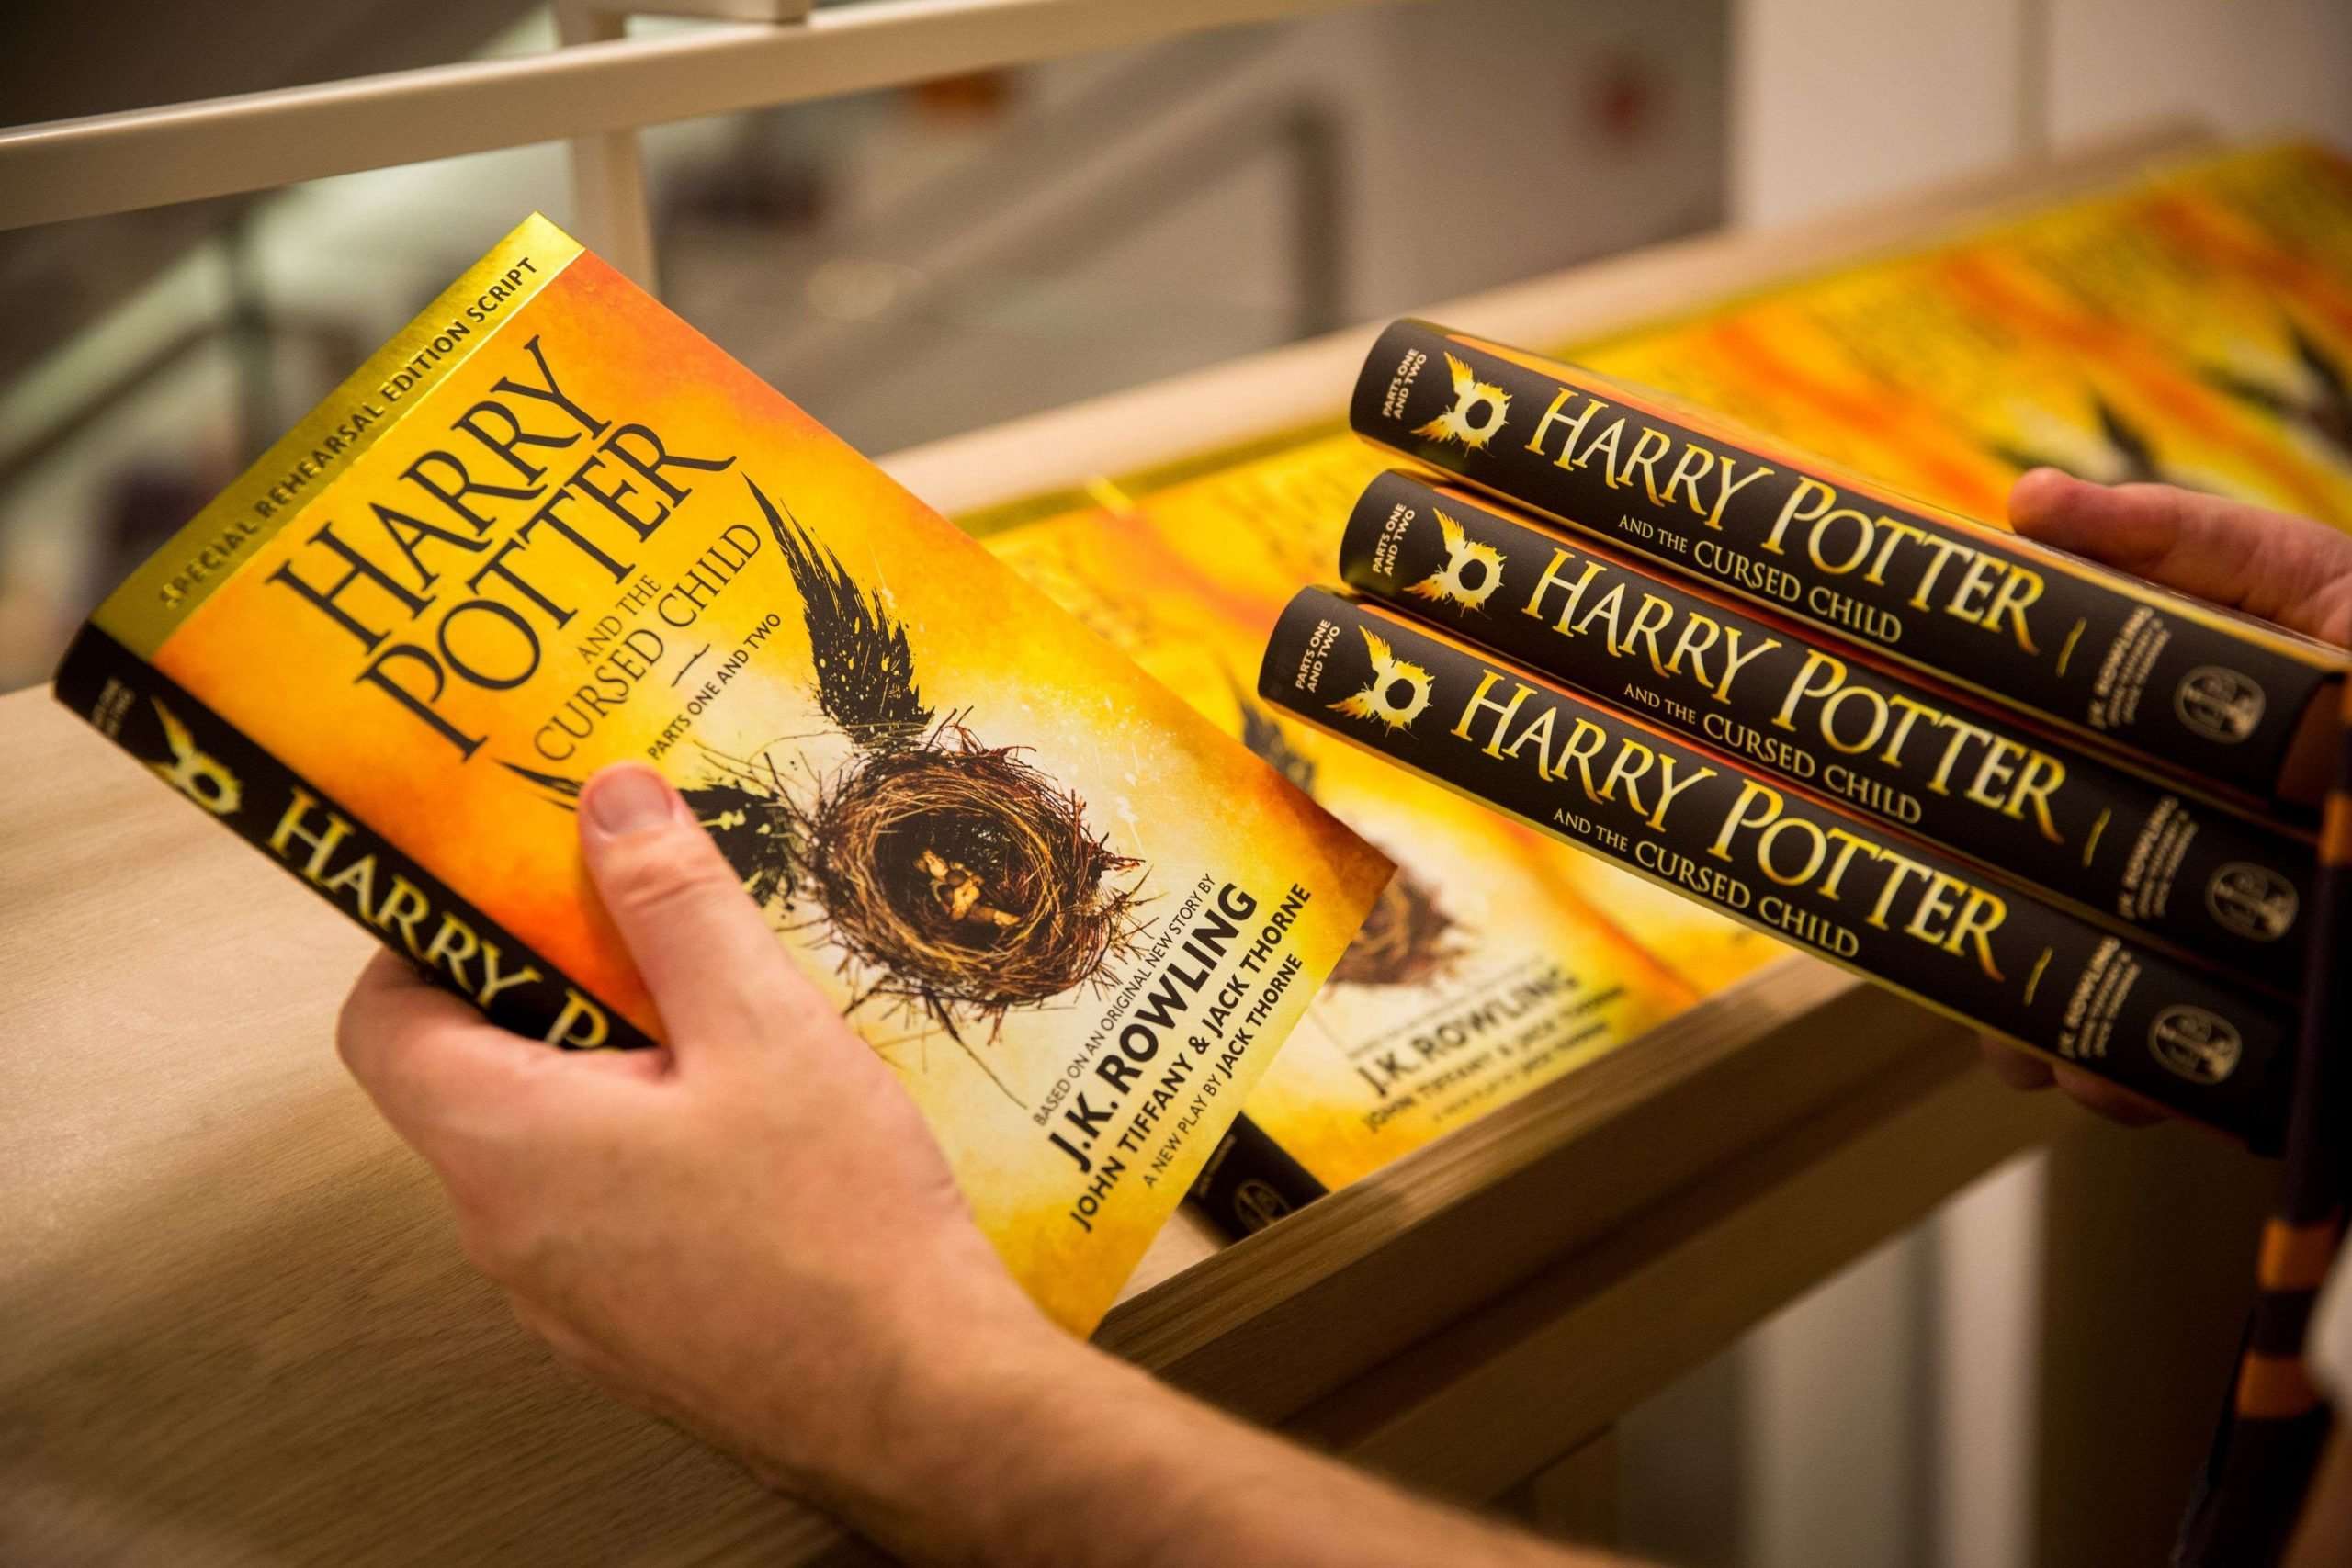 Good news, Potterheads: New book to chronicle behind